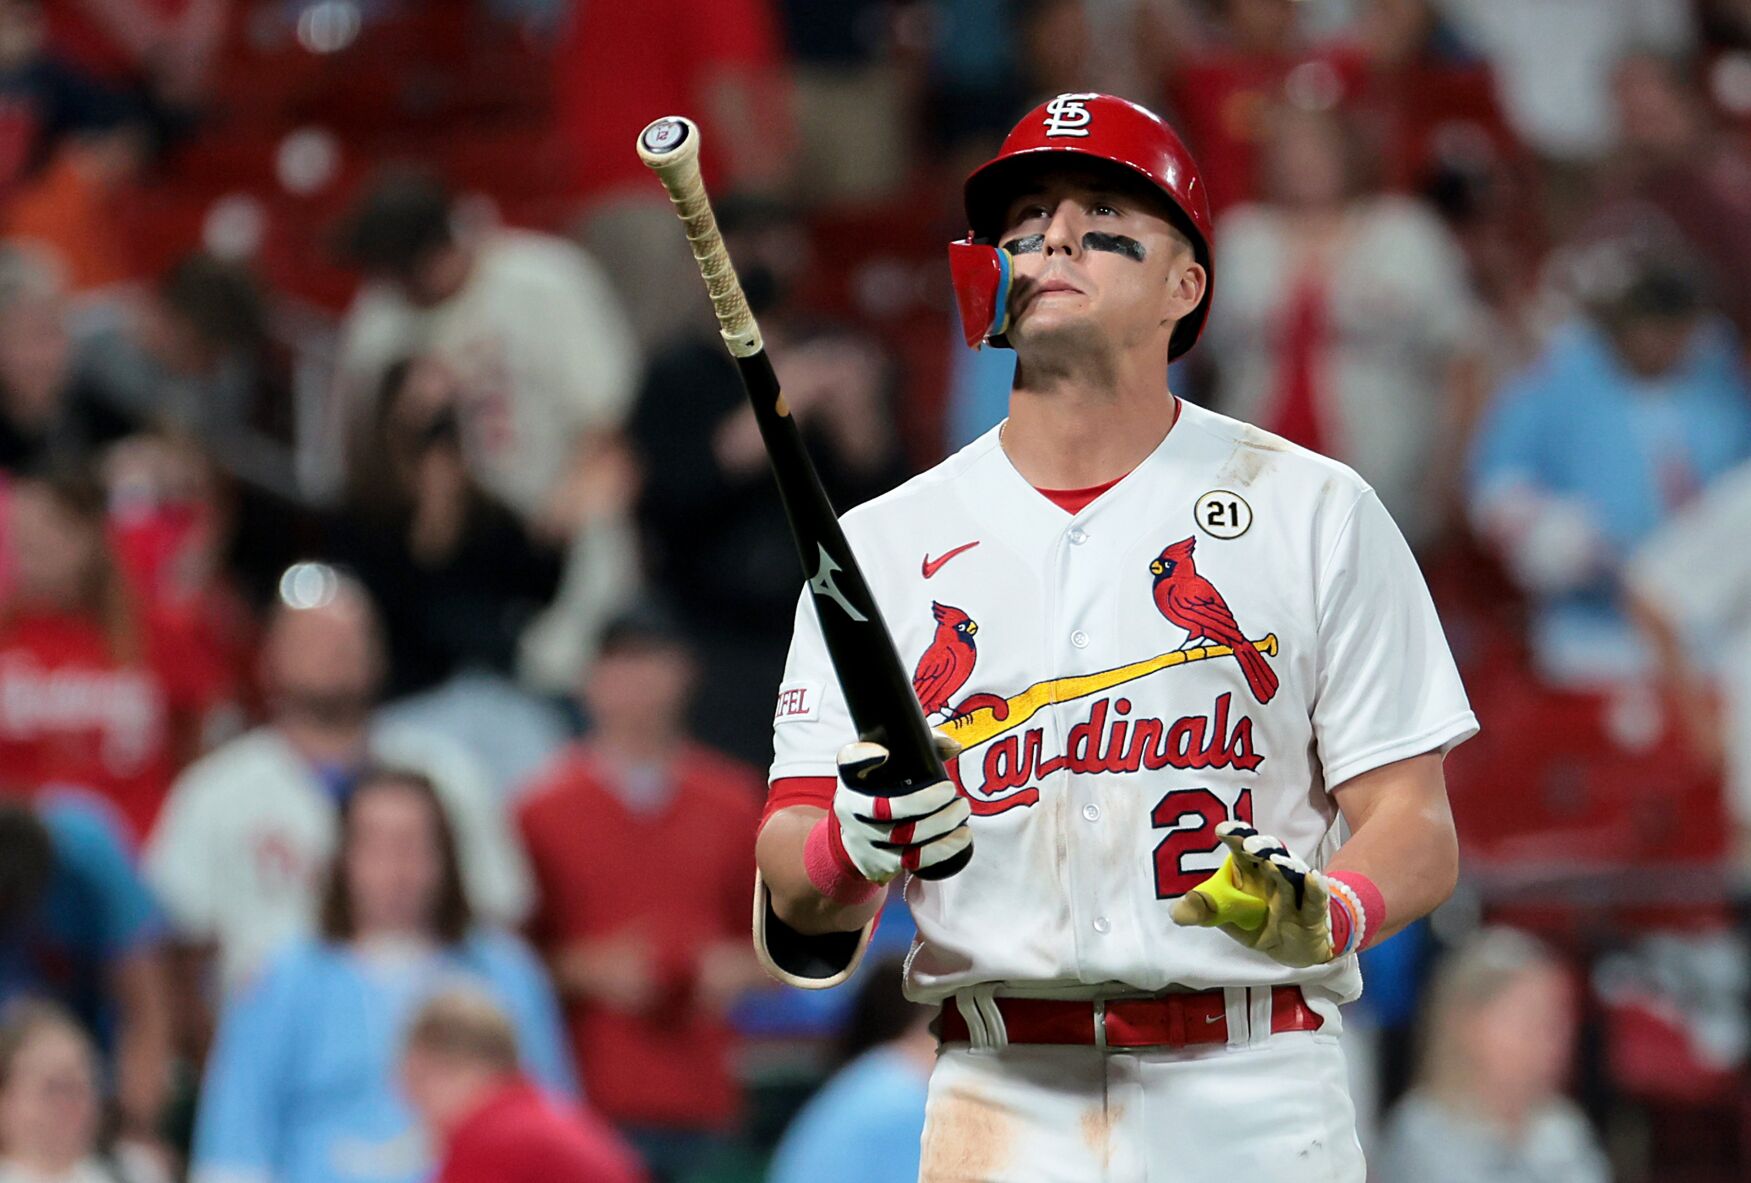 Within milestone loss, four who could help Cardinals back to winning ways (ones a Phillie)